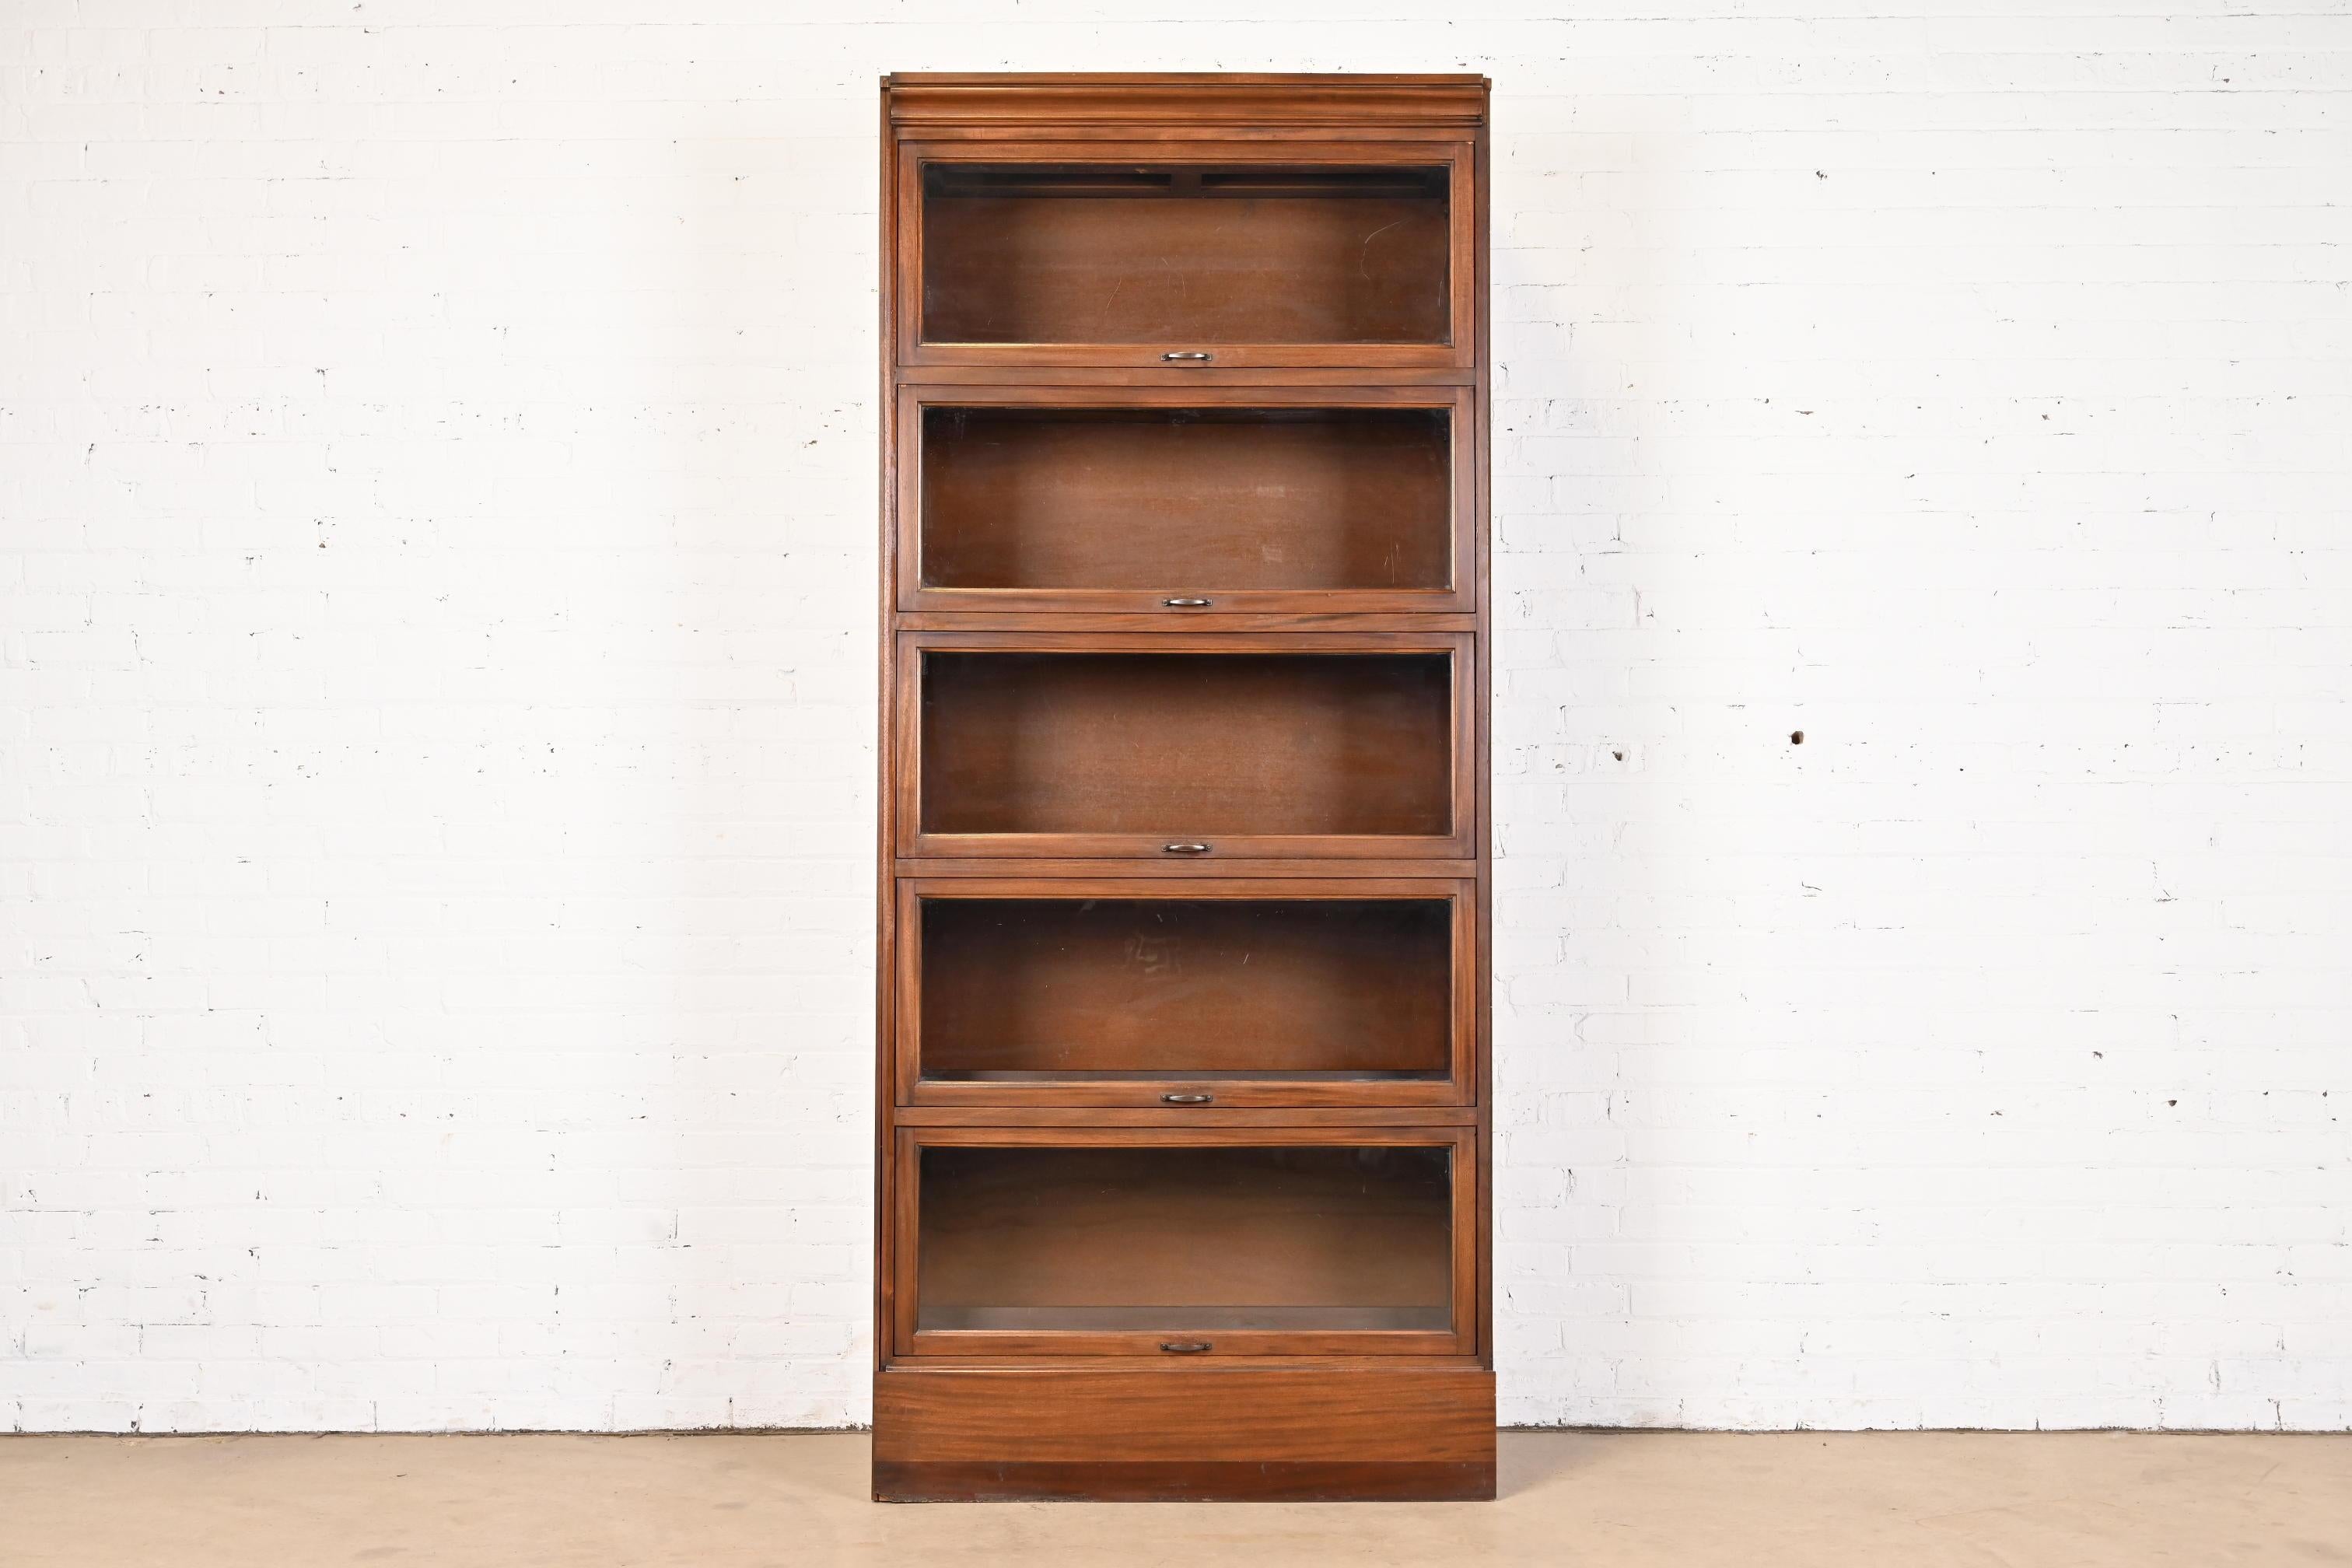 A gorgeous vintage Arts & Crafts large five-stack barrister bookcase

In the manner of Globe Wernicke

USA, Mid-20th Century

Mahogany, with glass front doors and brass hardware.

Measures: 38.88